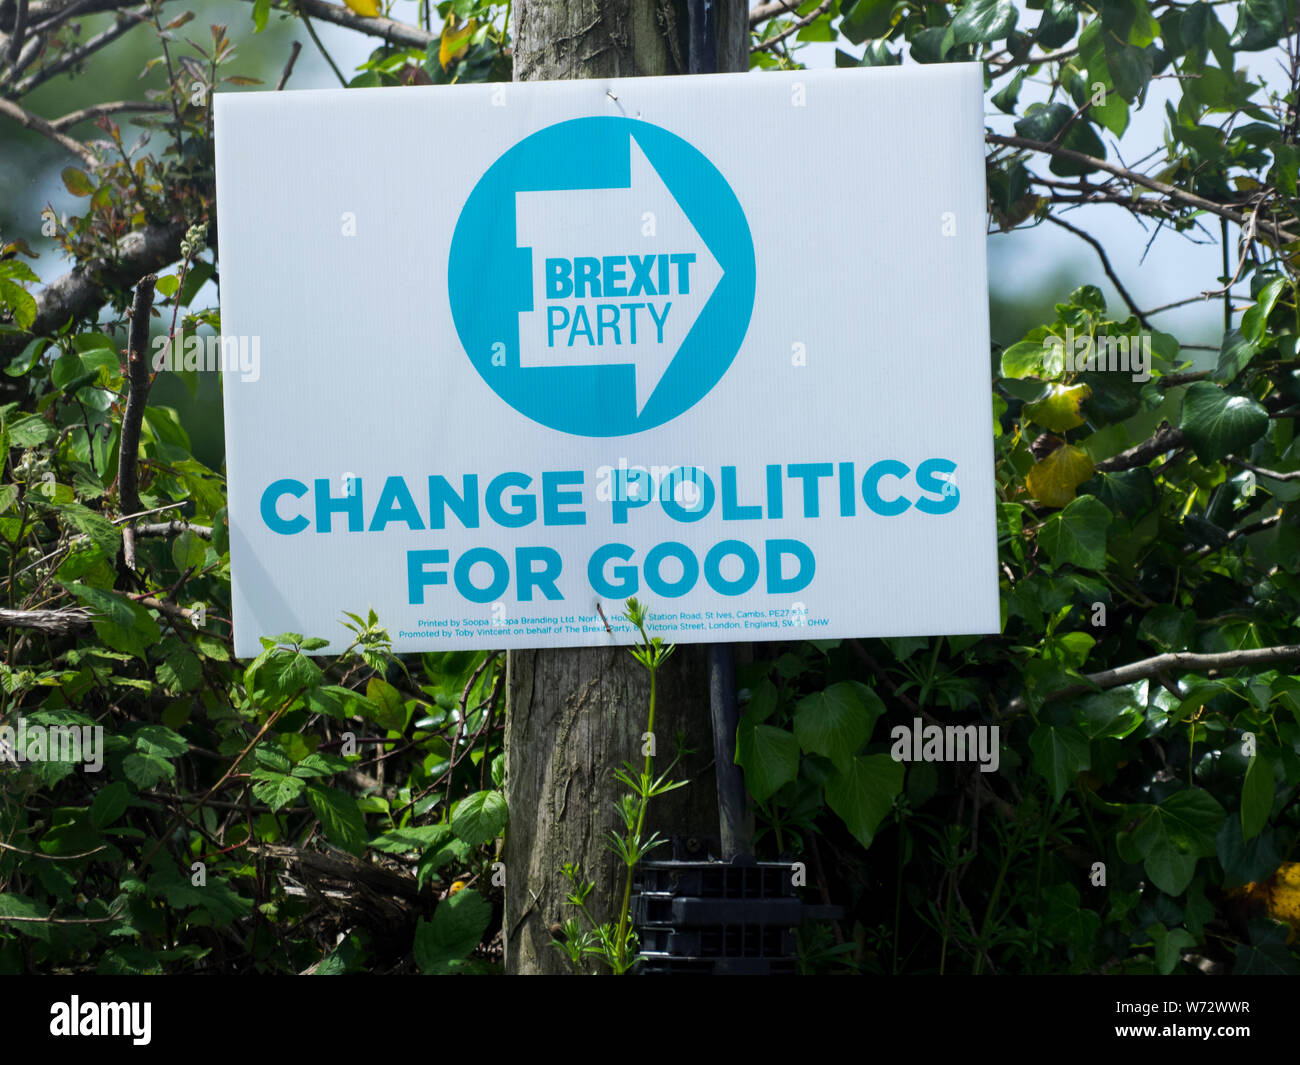 Brexit Party sign, UK Stock Photo